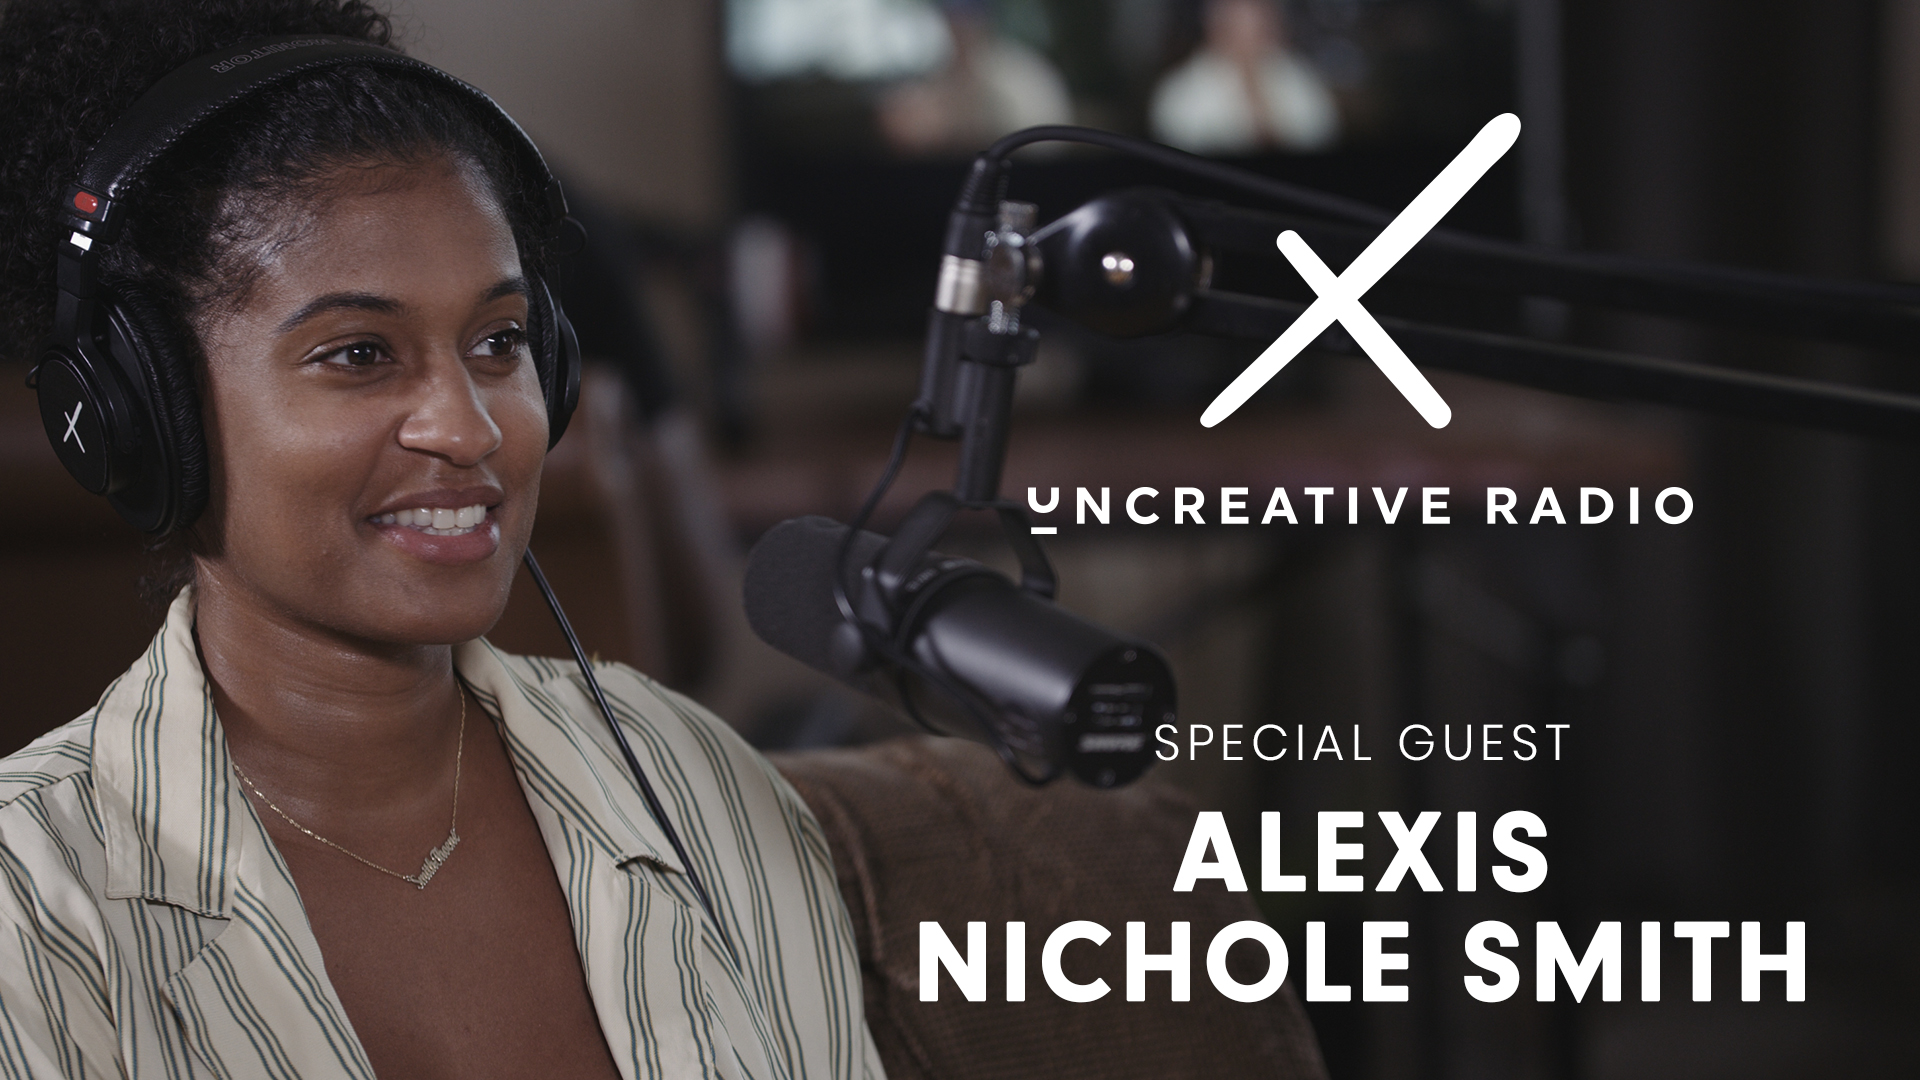 Uncreative Radio with Special Guest Alexis Nichole Smith title wearing black headphones by a microphone